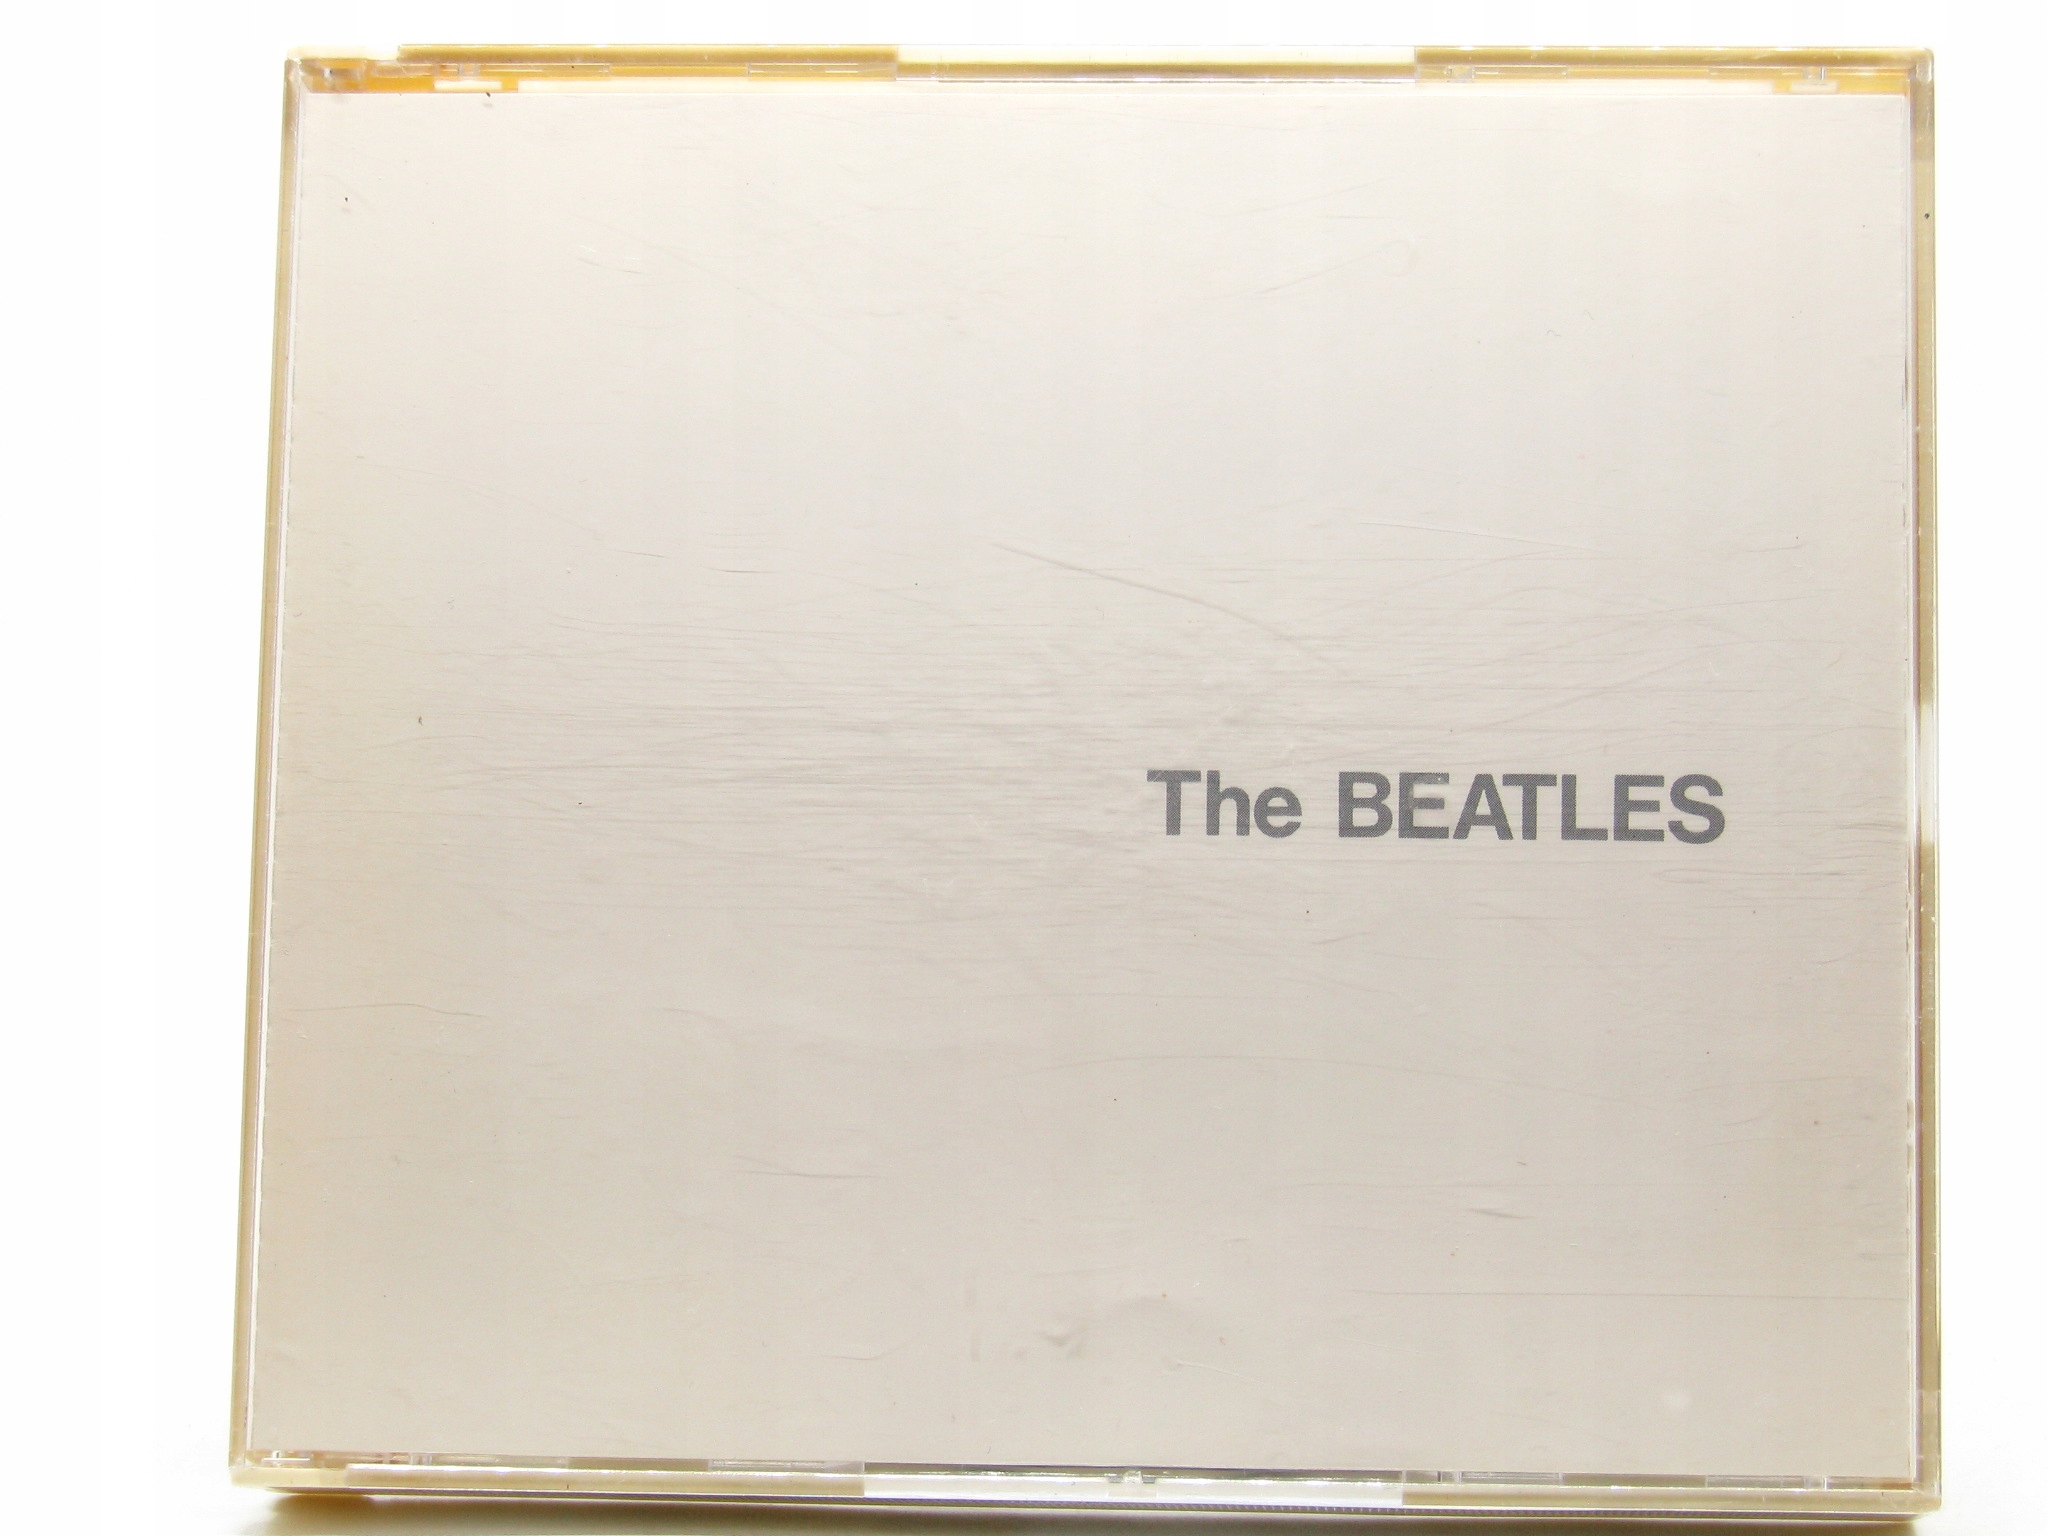 The Beatles - The Beatles (2CD)